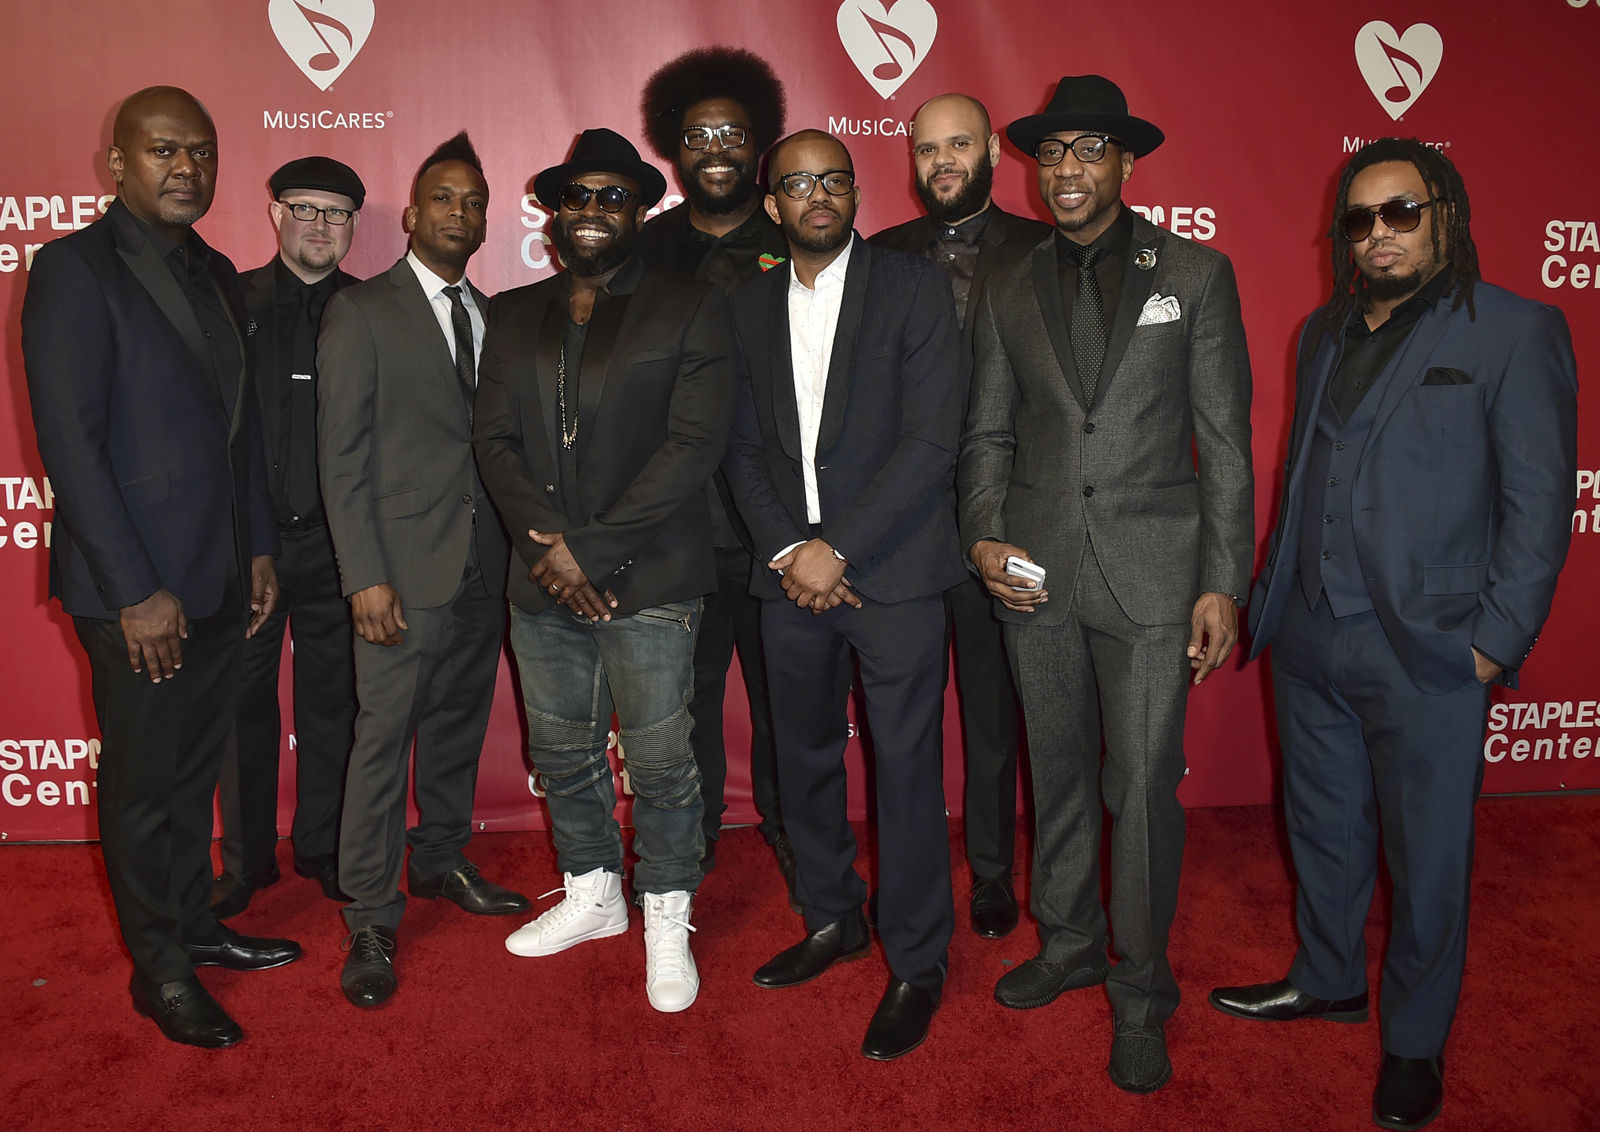 The Roots are also scheduled to perform. (Photo by Jordan Strauss/Invision/AP, File)